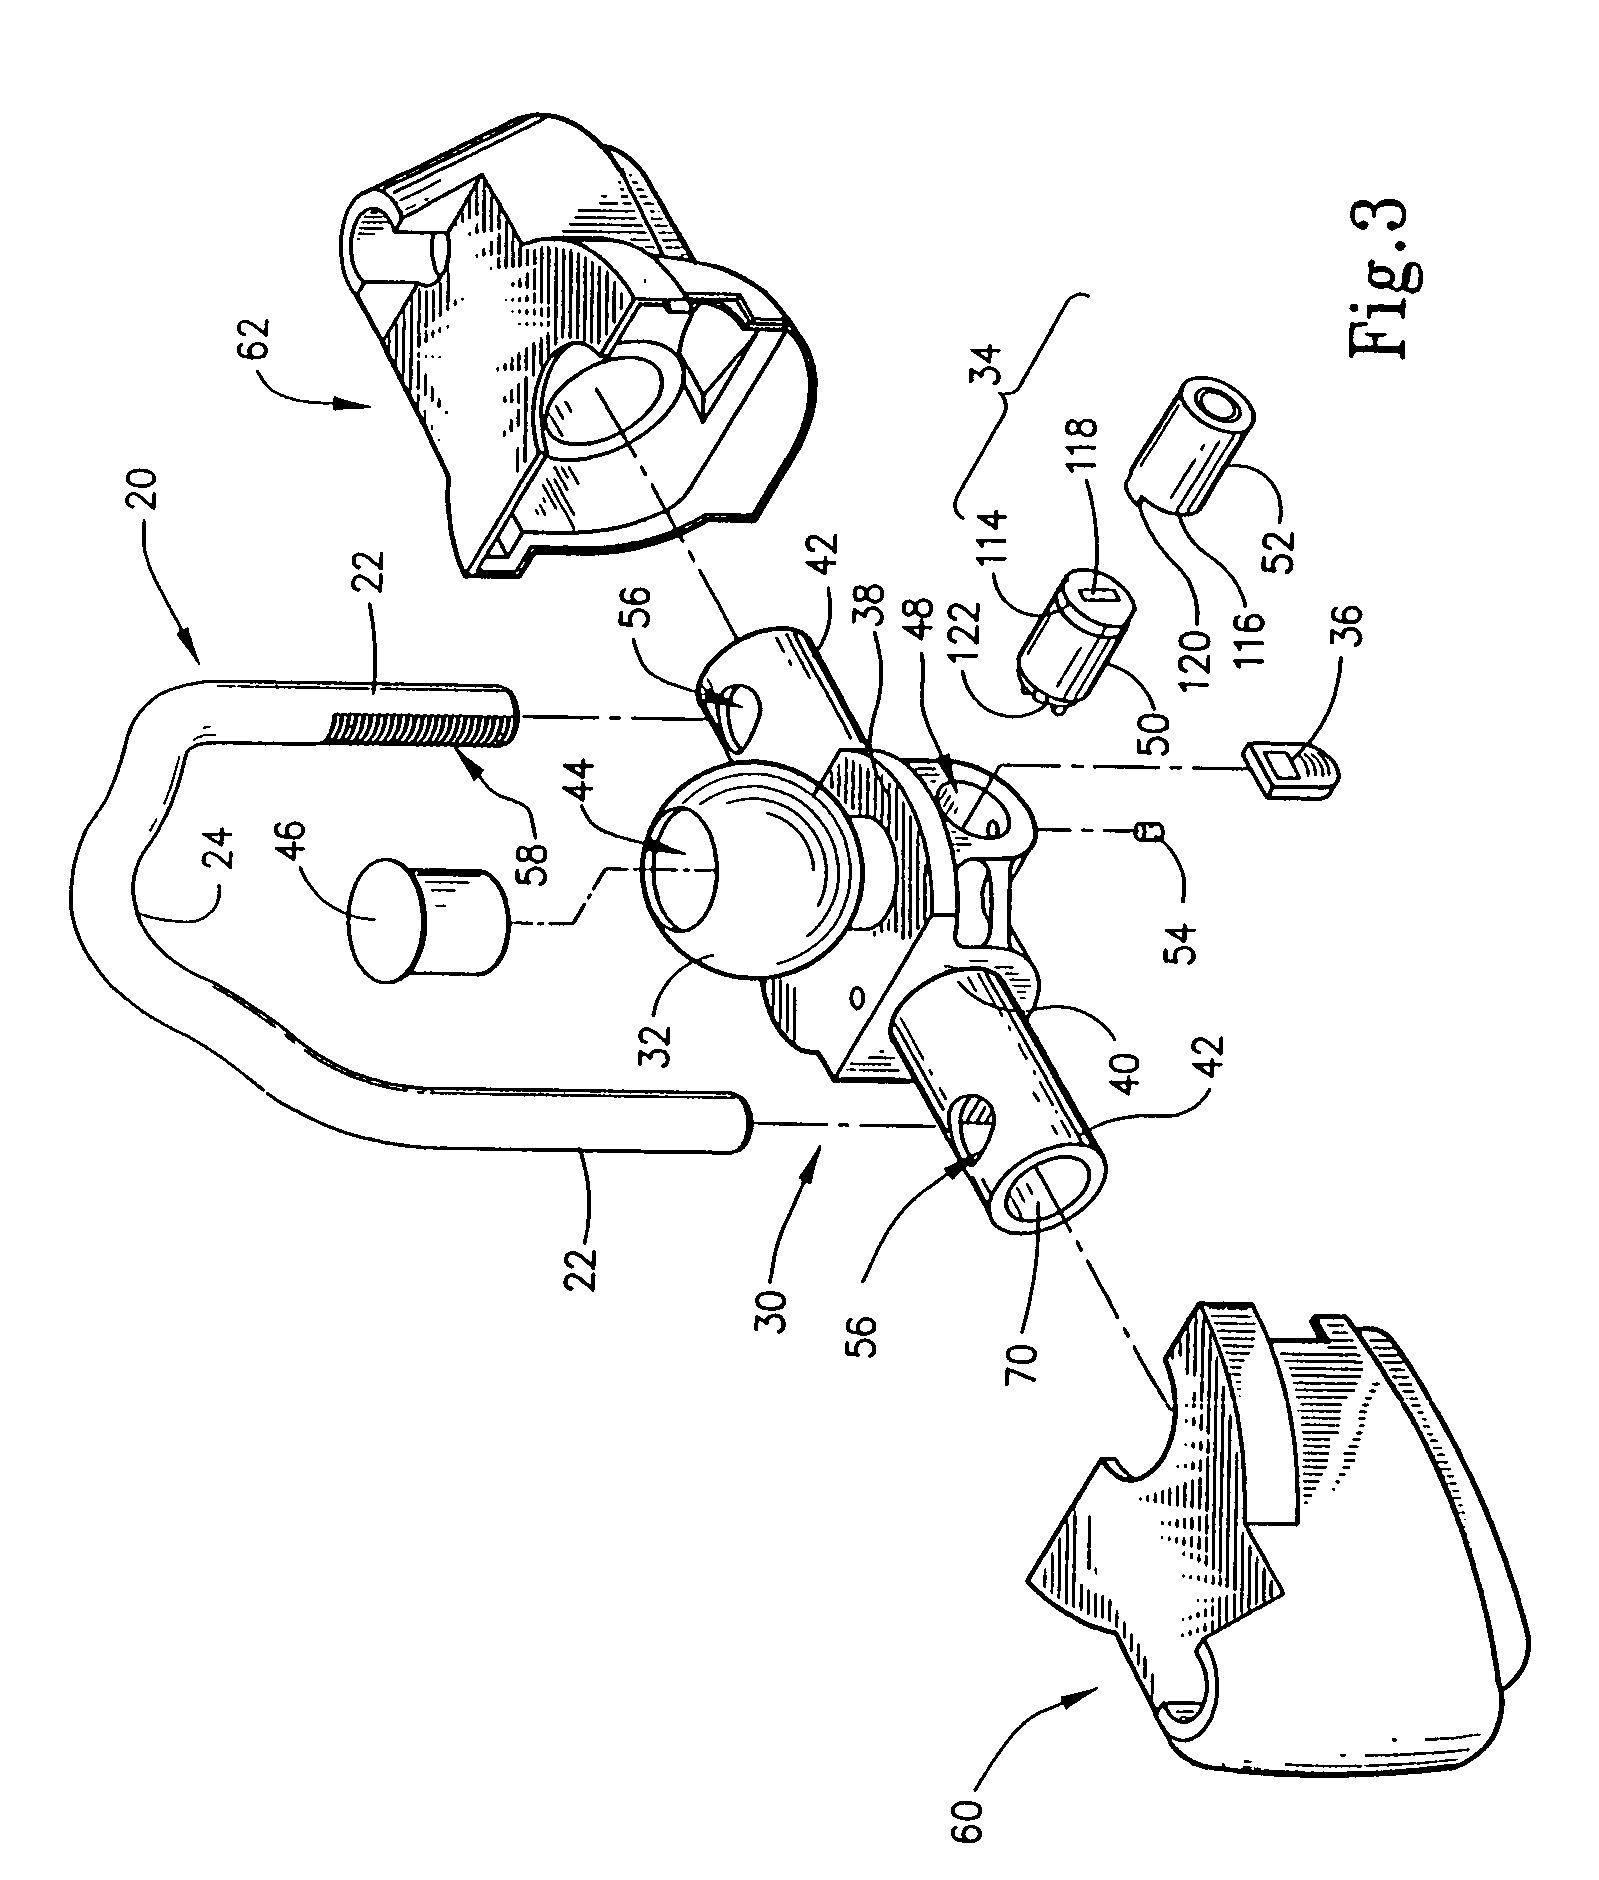 Locking device for trailer hitches and method therefor